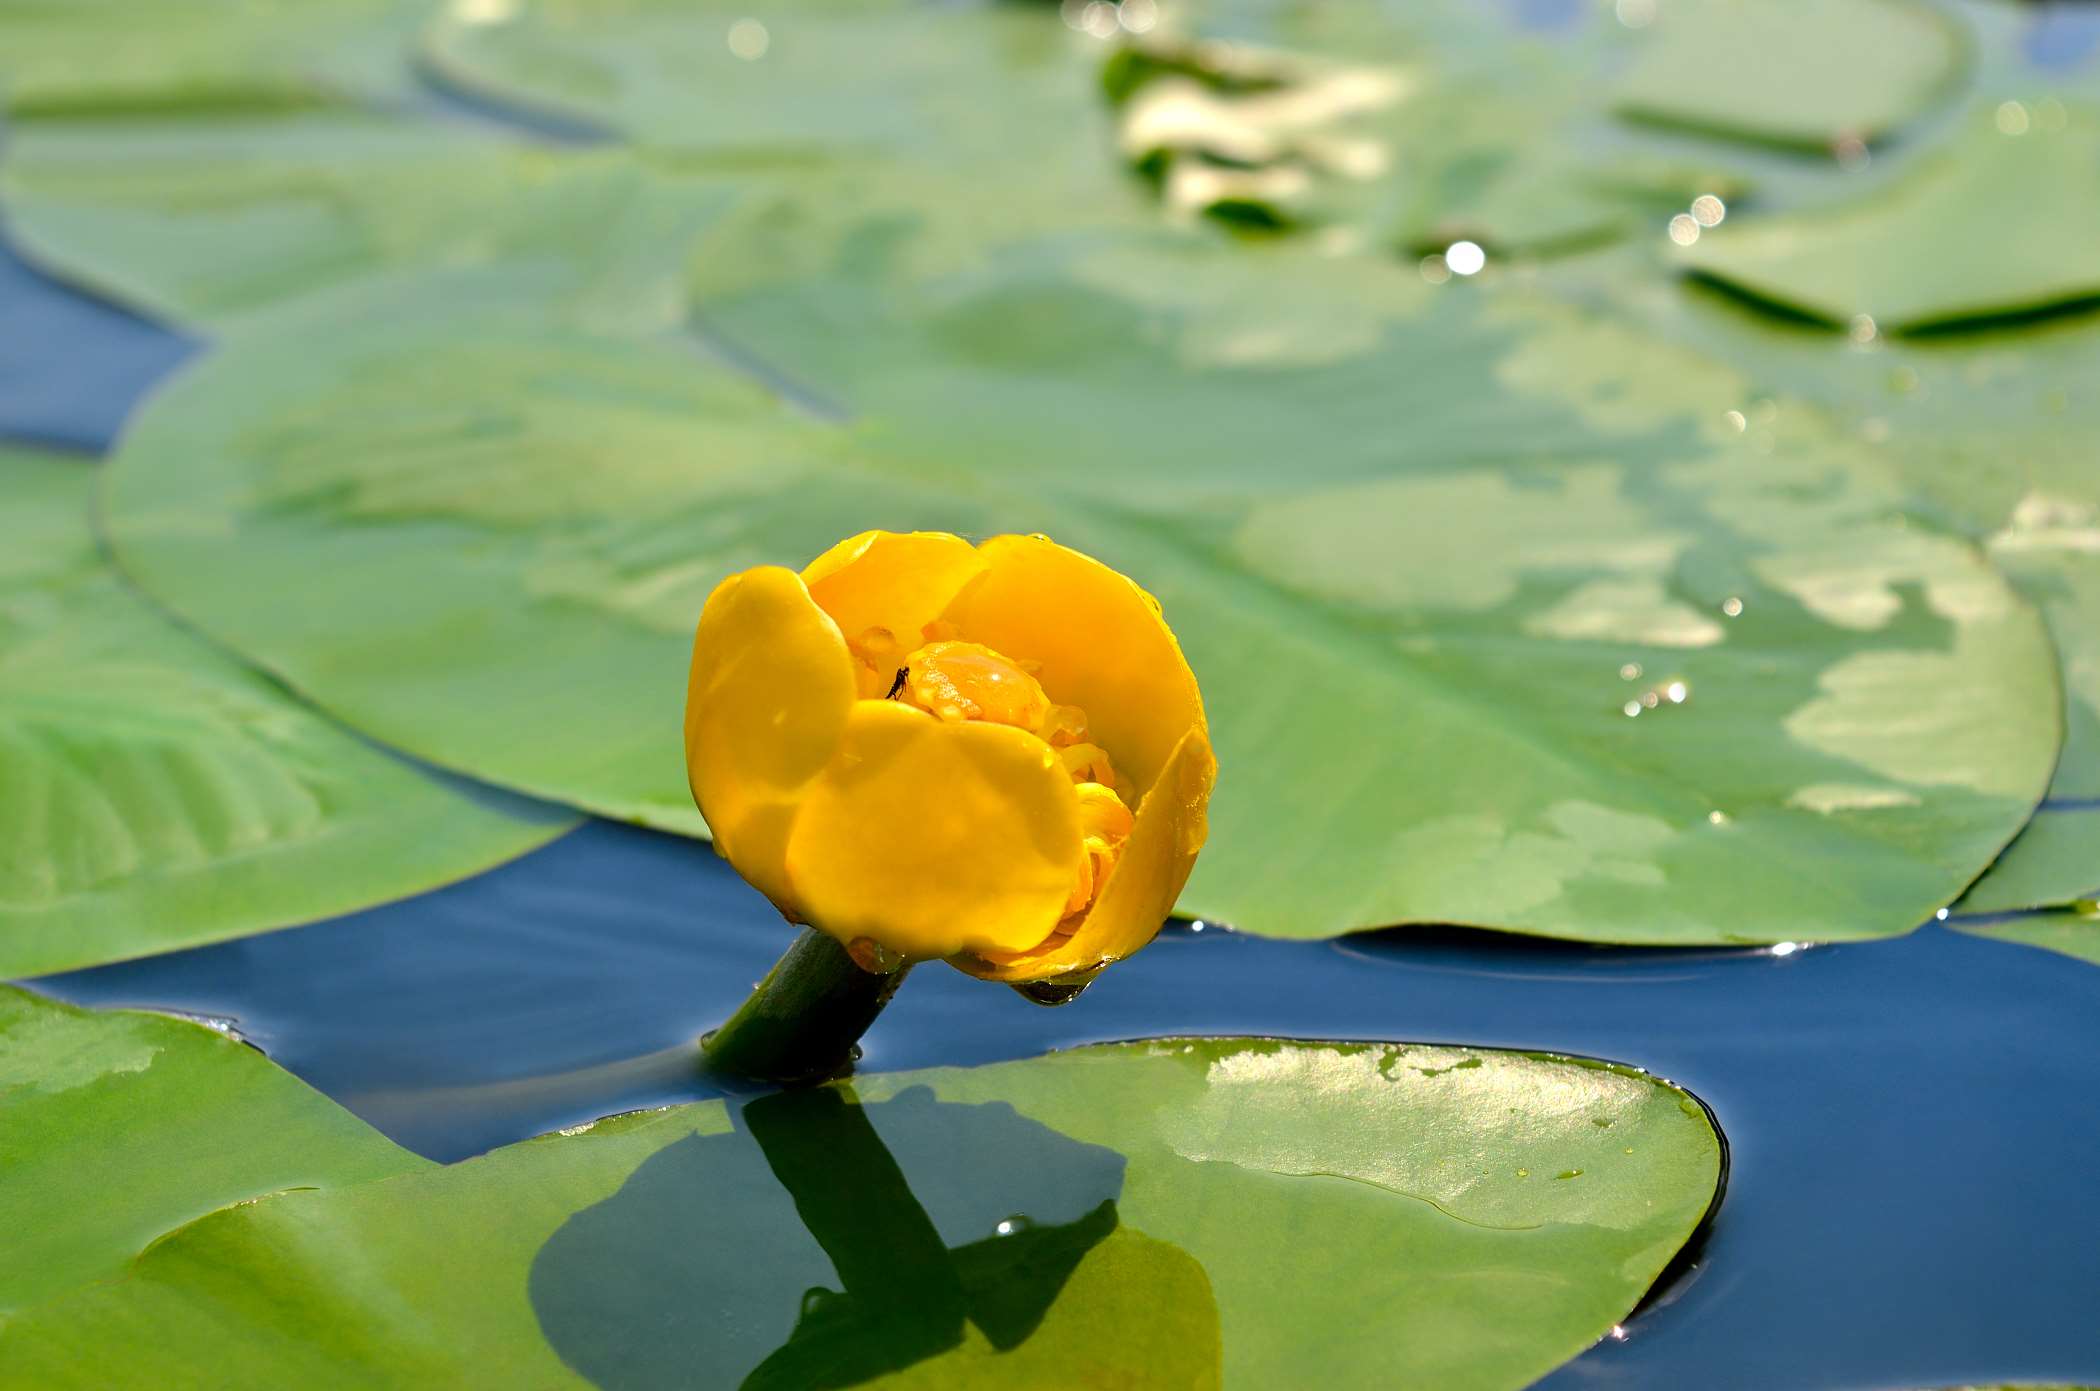 The Yellow Water Lily Spadderdock: A Radiant Beauty of Aquatic Ecosystems